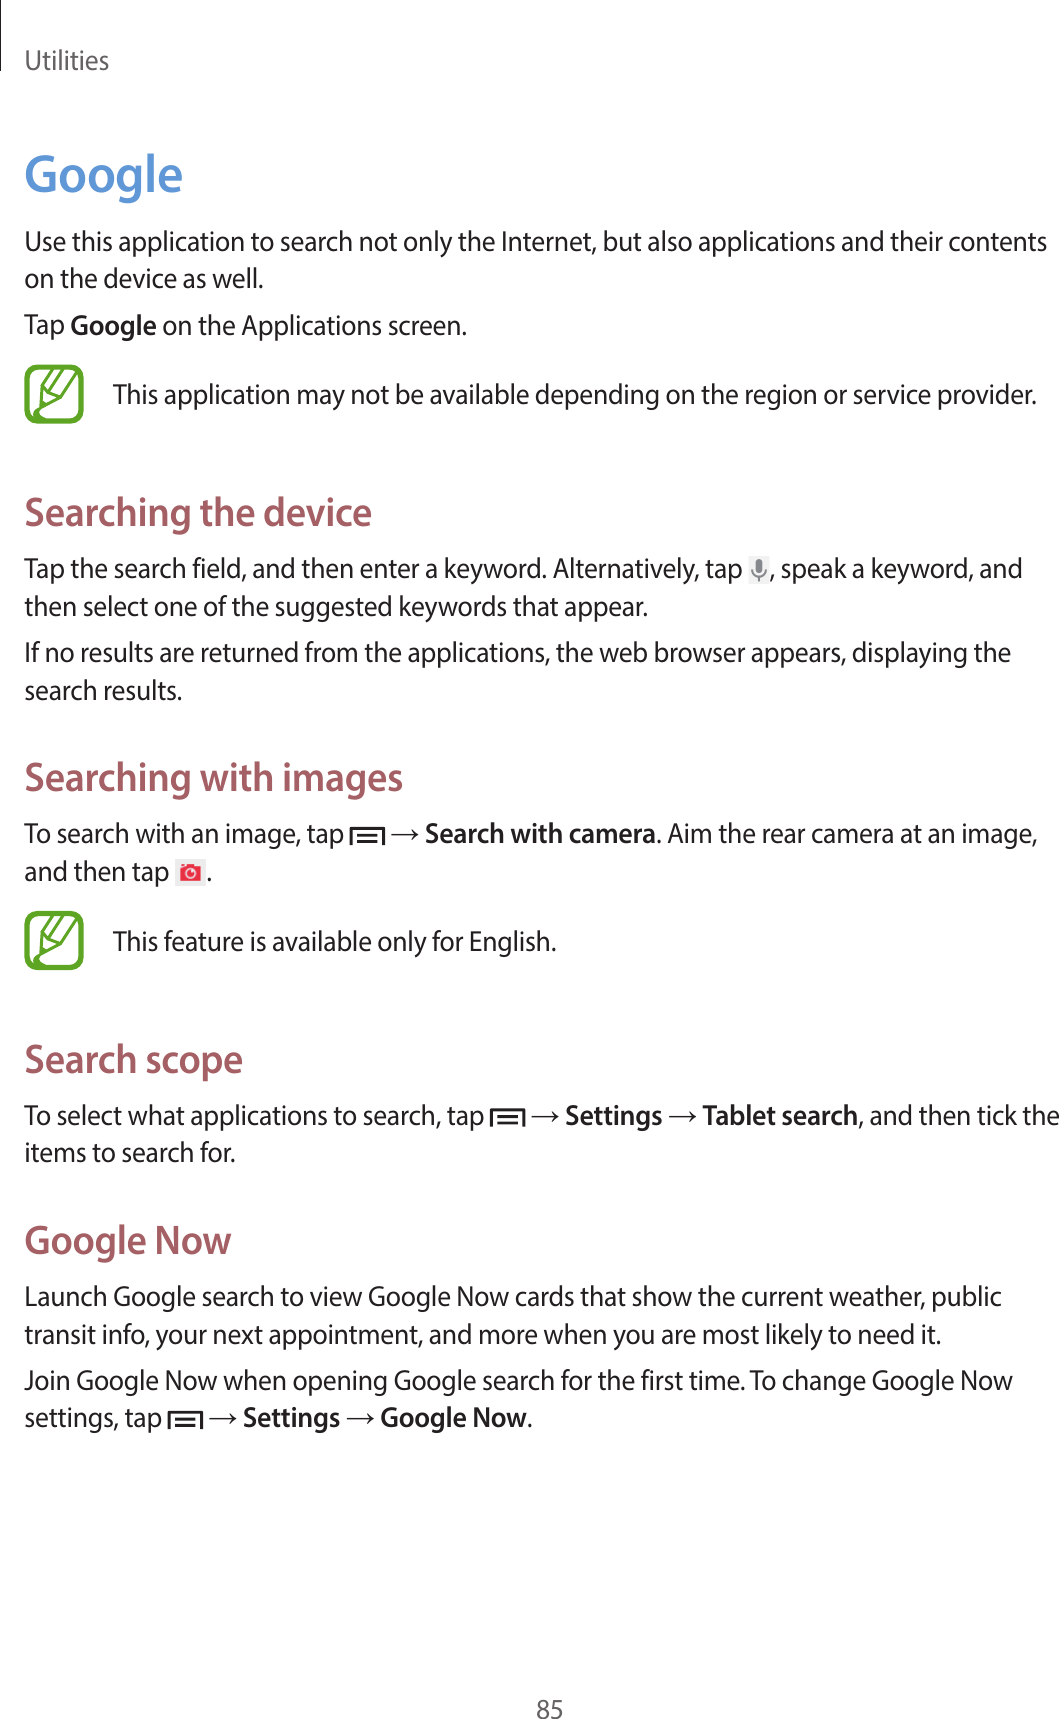 Utilities85GoogleUse this application to search not only the Internet, but also applications and their contents on the device as well.Tap Google on the Applications screen.This application may not be available depending on the region or service provider.Searching the deviceTap the search field, and then enter a keyword. Alternatively, tap  , speak a keyword, and then select one of the suggested keywords that appear.If no results are returned from the applications, the web browser appears, displaying the search results.Searching with imagesTo search with an image, tap   → Search with camera. Aim the rear camera at an image, and then tap  .This feature is available only for English.Search scopeTo select what applications to search, tap   → Settings → Tablet search, and then tick the items to search for.Google NowLaunch Google search to view Google Now cards that show the current weather, public transit info, your next appointment, and more when you are most likely to need it.Join Google Now when opening Google search for the first time. To change Google Now settings, tap   → Settings → Google Now.